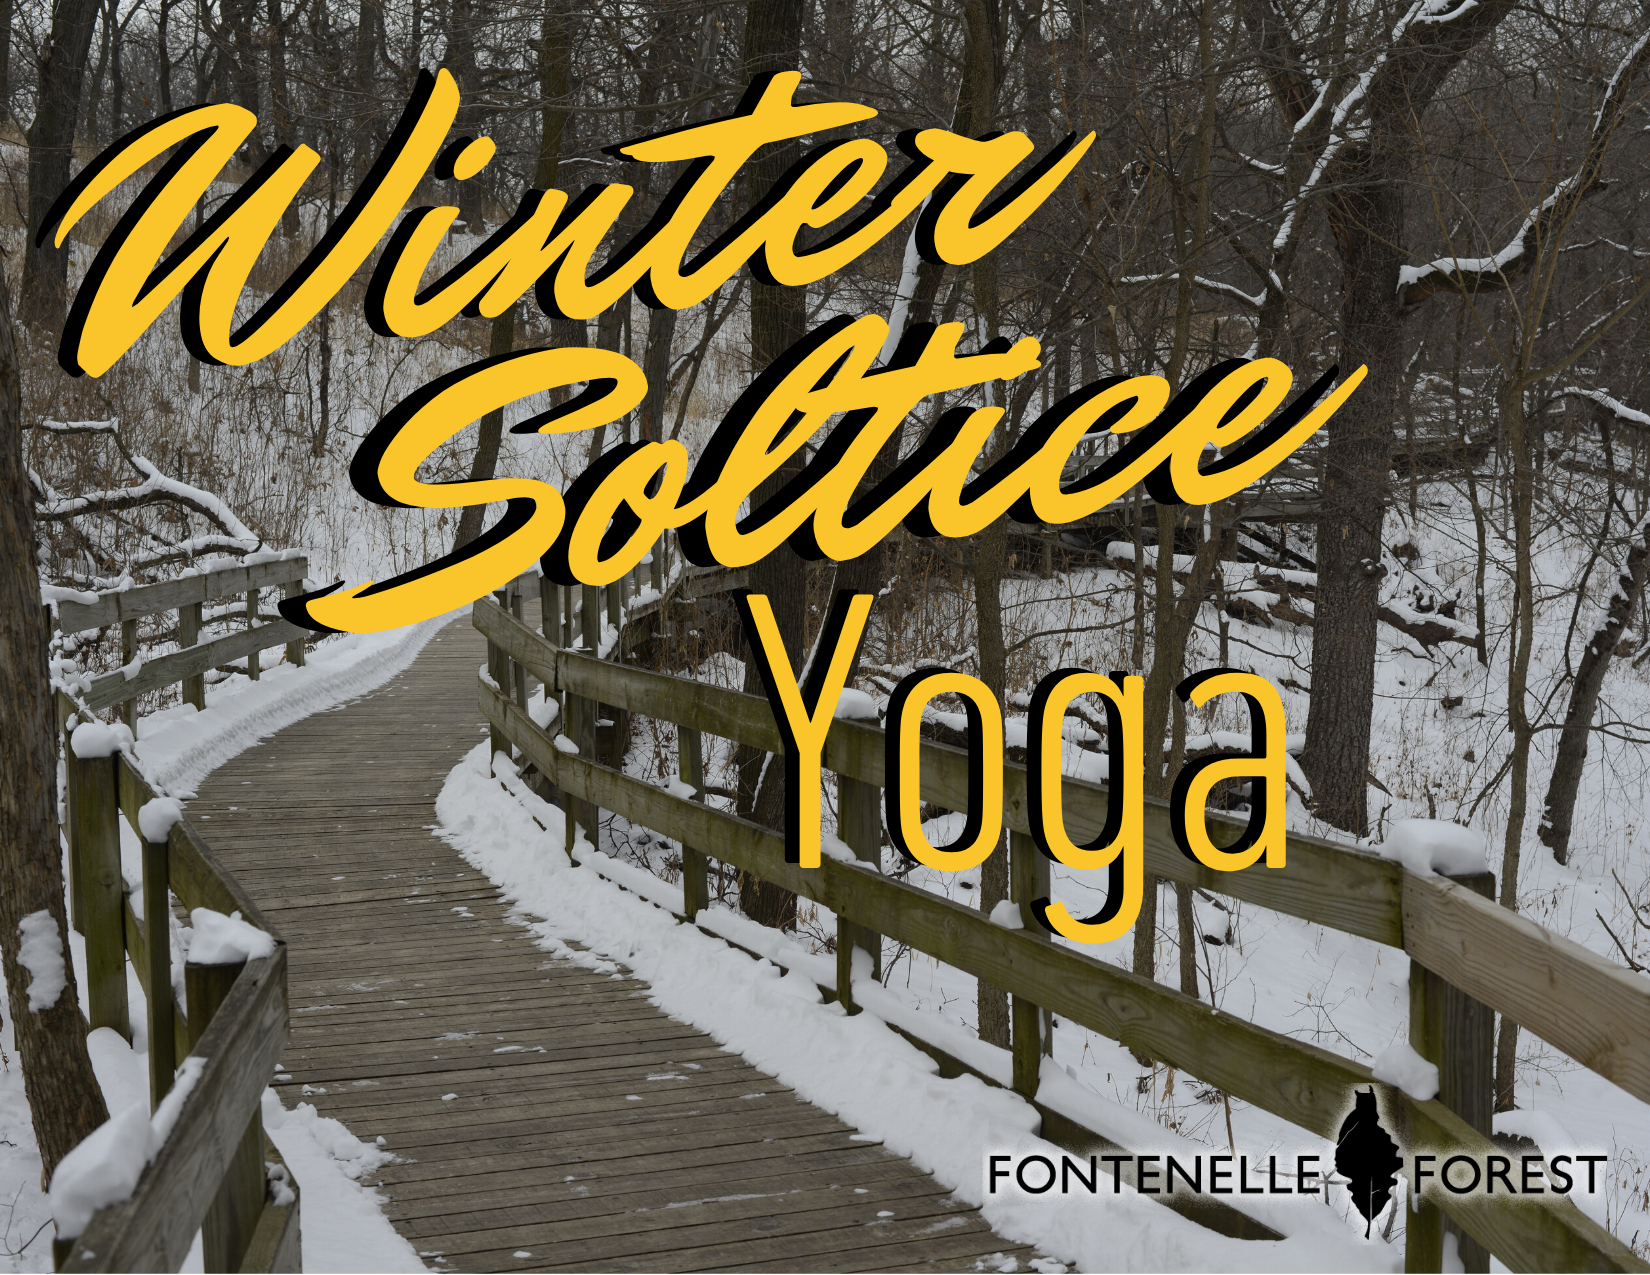 A picture of the boardwalk through the woods in winter with snow. It had the yellow text, "Winter Soltice Yoga" with the Fontenelle Forest logo in black in the bottom right.